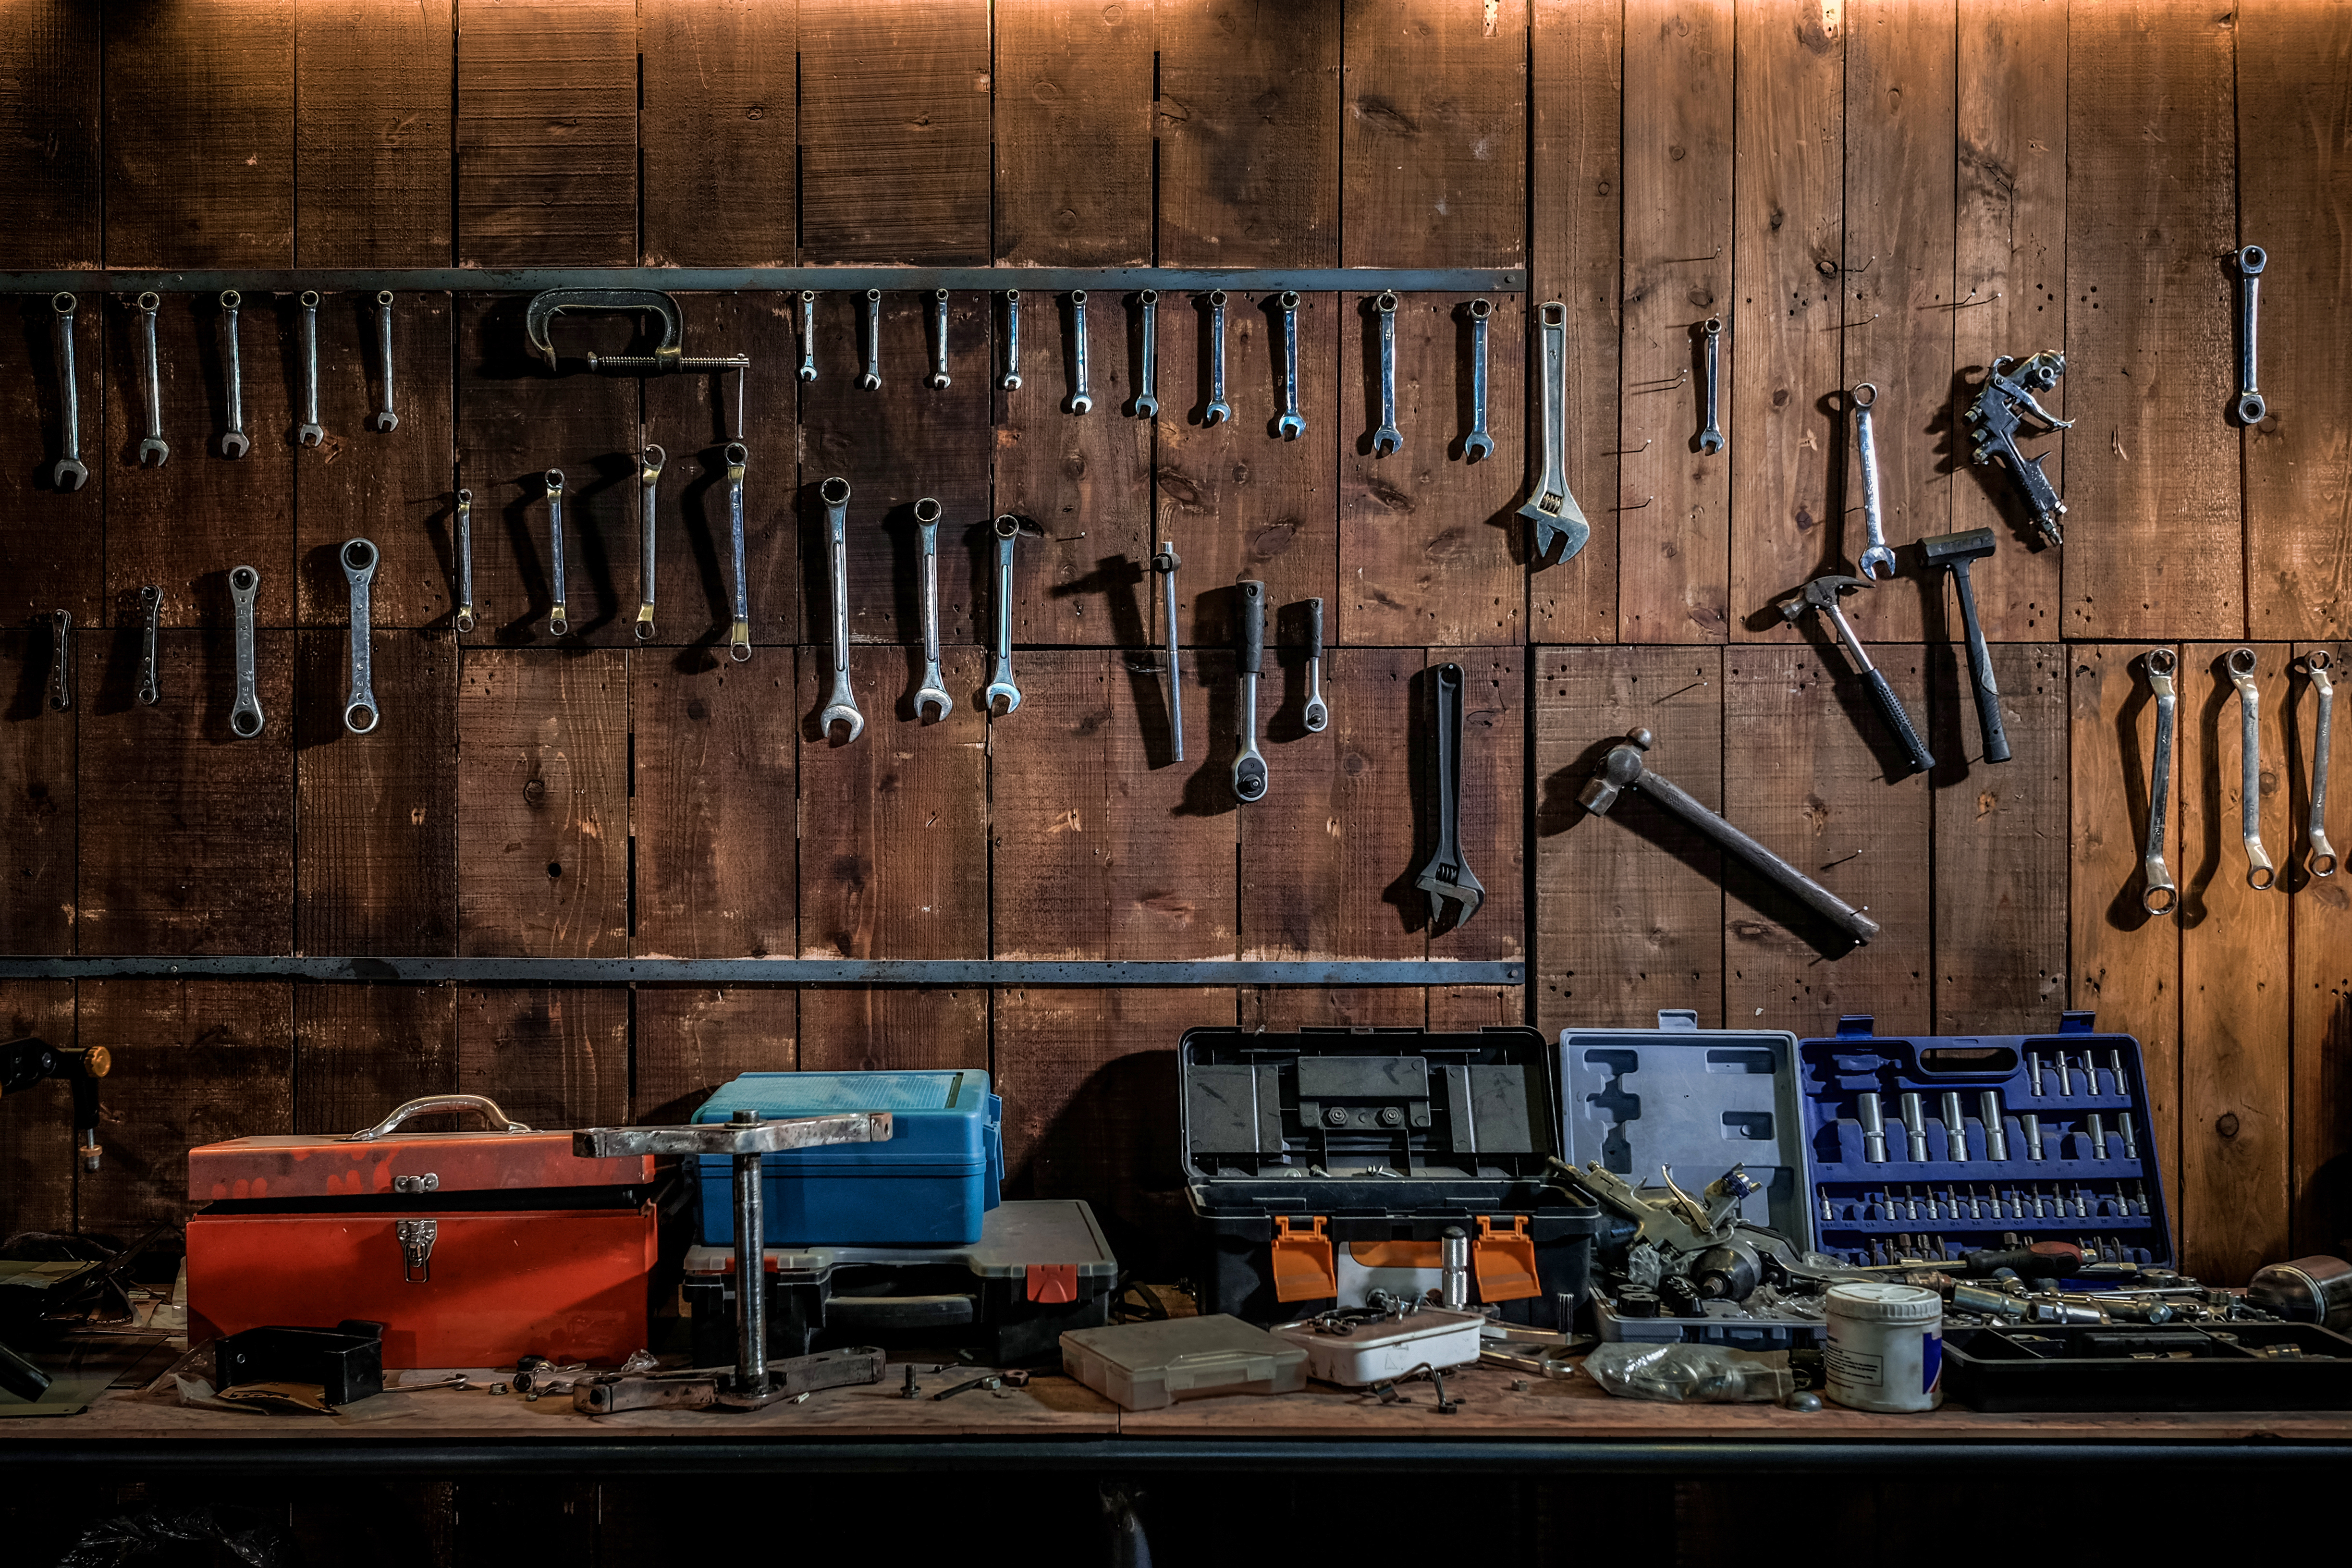 Workshop scene. Old tools hanging on wall in workshop, Tool shelf against a table and wall, vintage garage style. | Source: Shutterstock